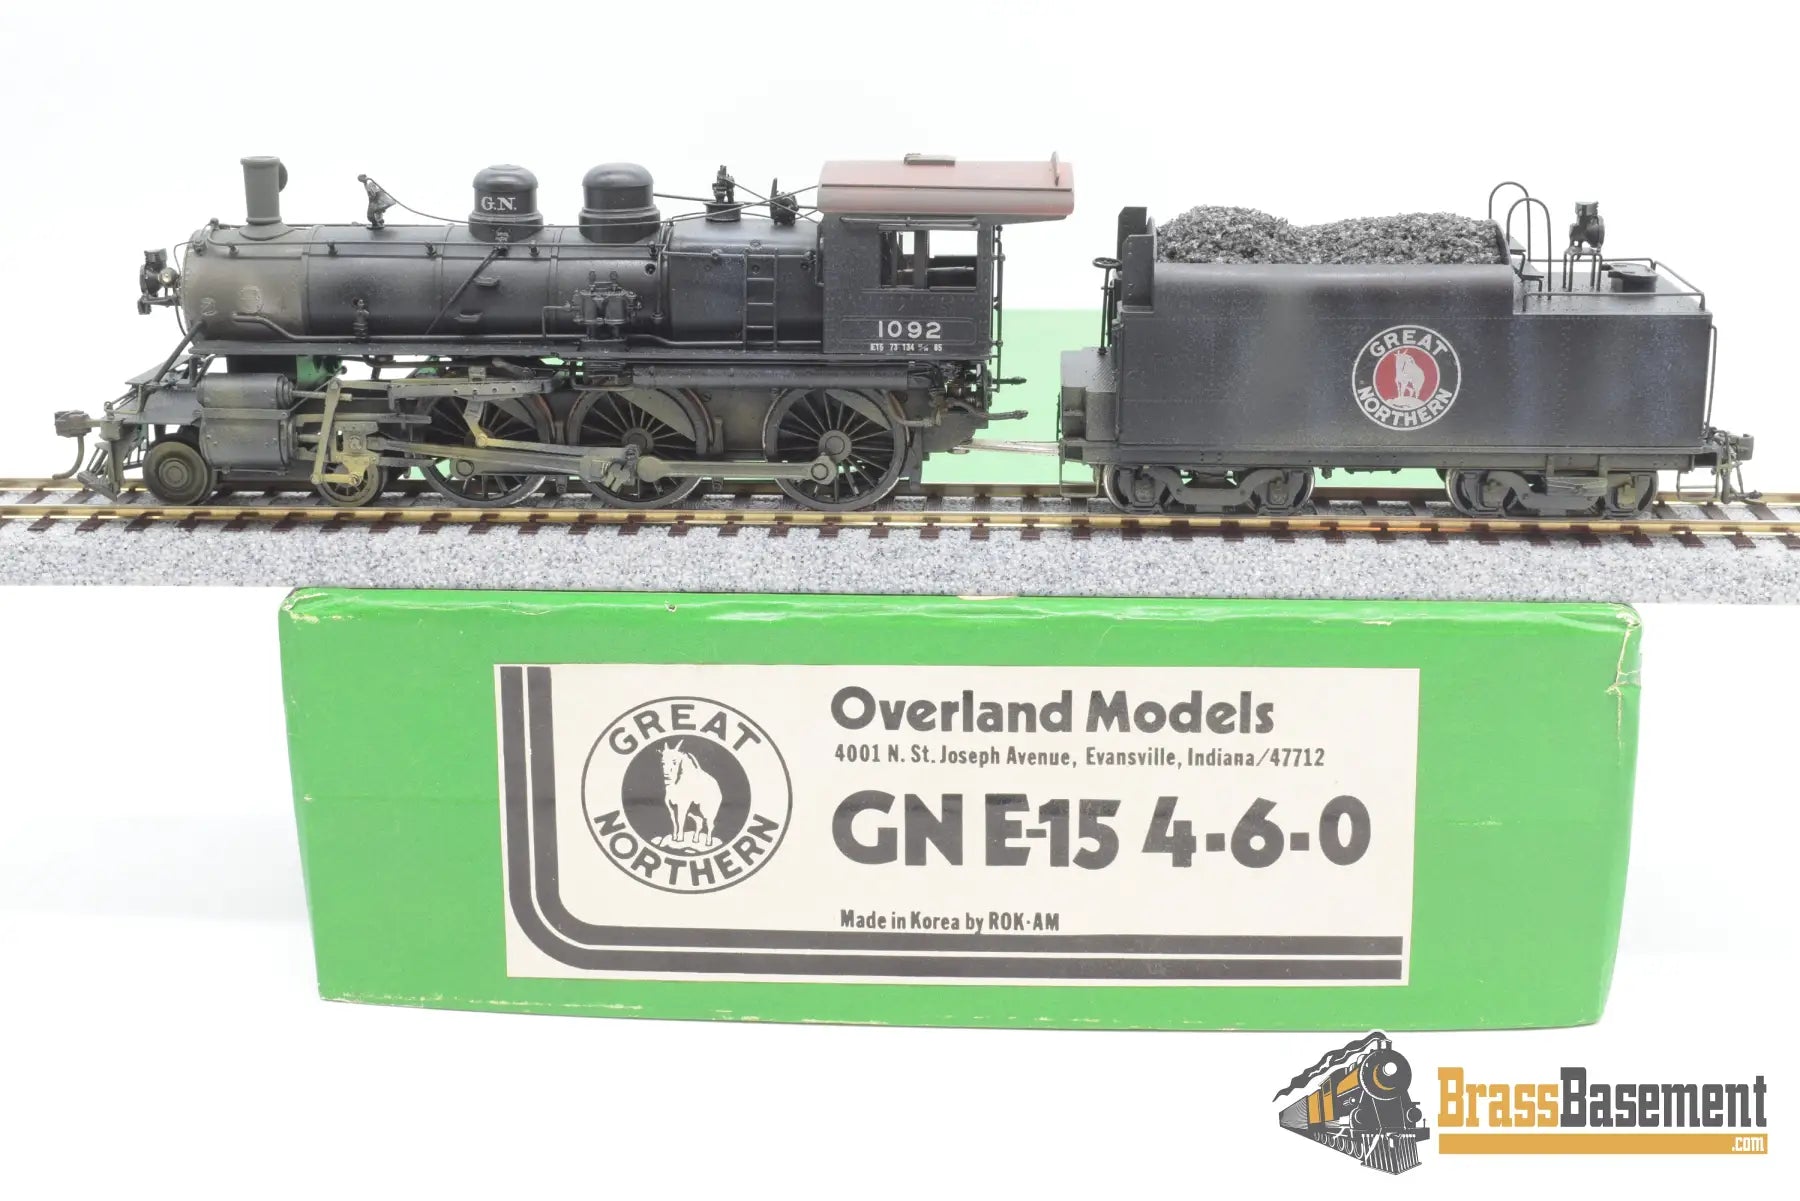 Ho Brass - Omi Overland Great Northern E - 15 4 - 6 - 0 Nice Paint Steam